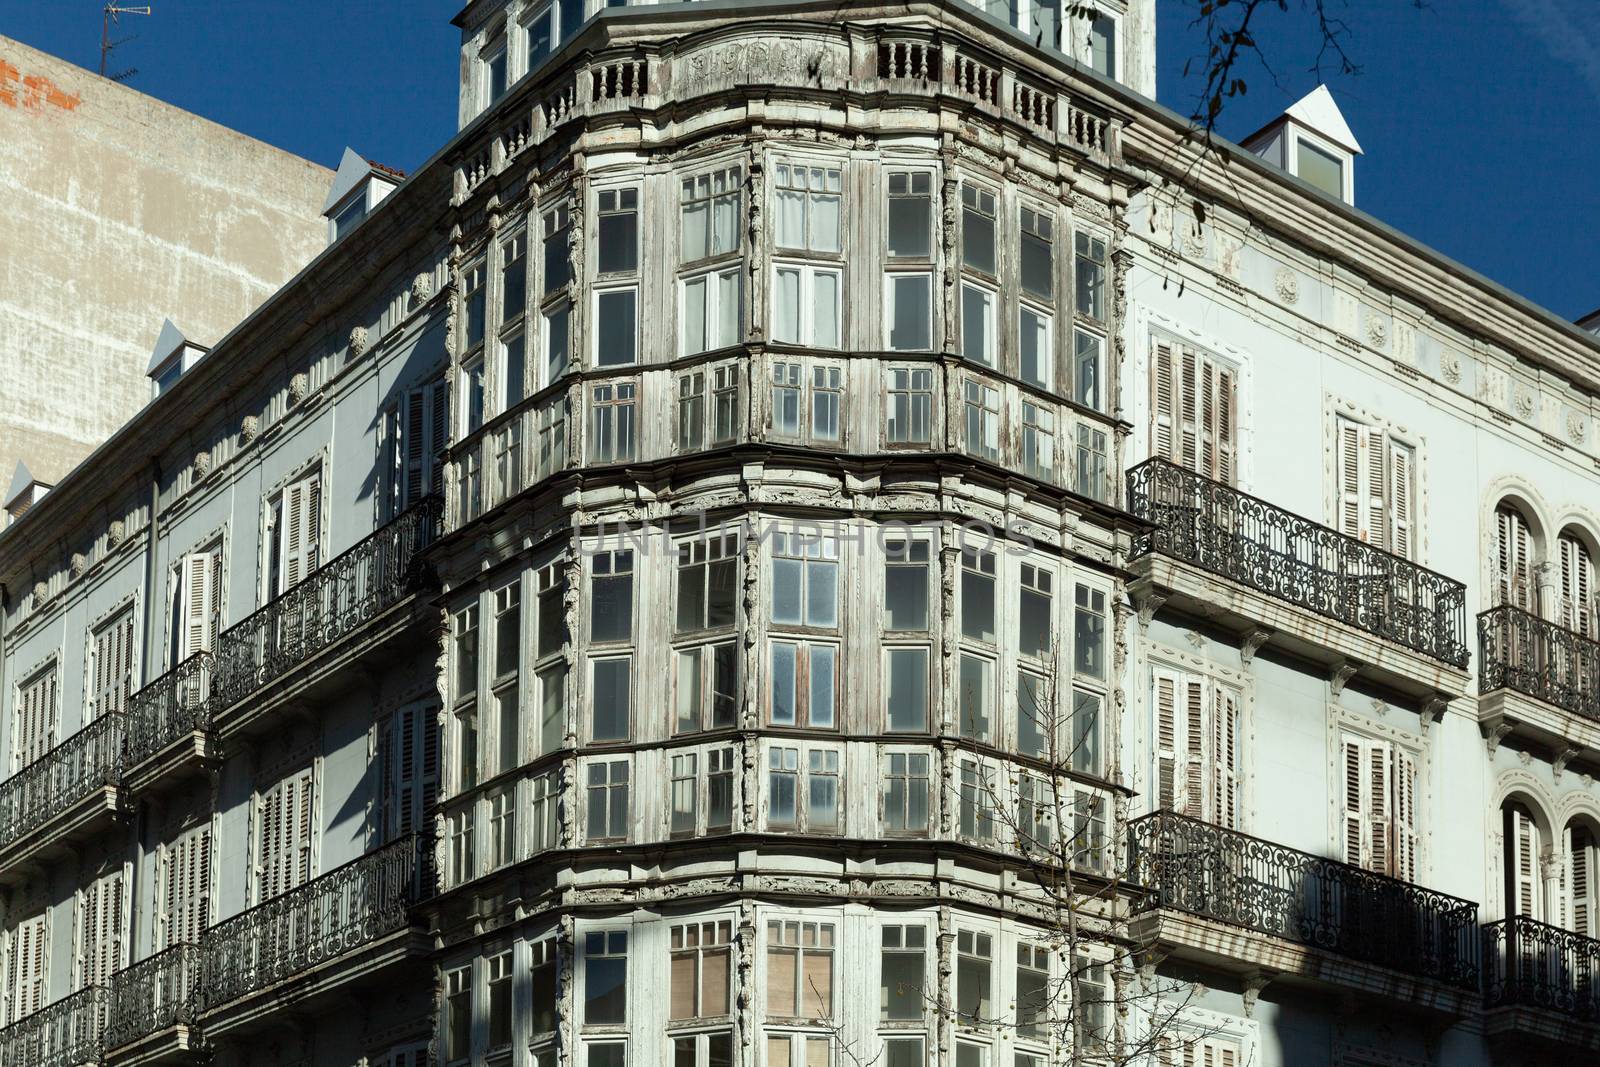 Valladolid, Spain - 10 December 2018: Typical architecture of Northern Spain, Calle Miguel iscar 17